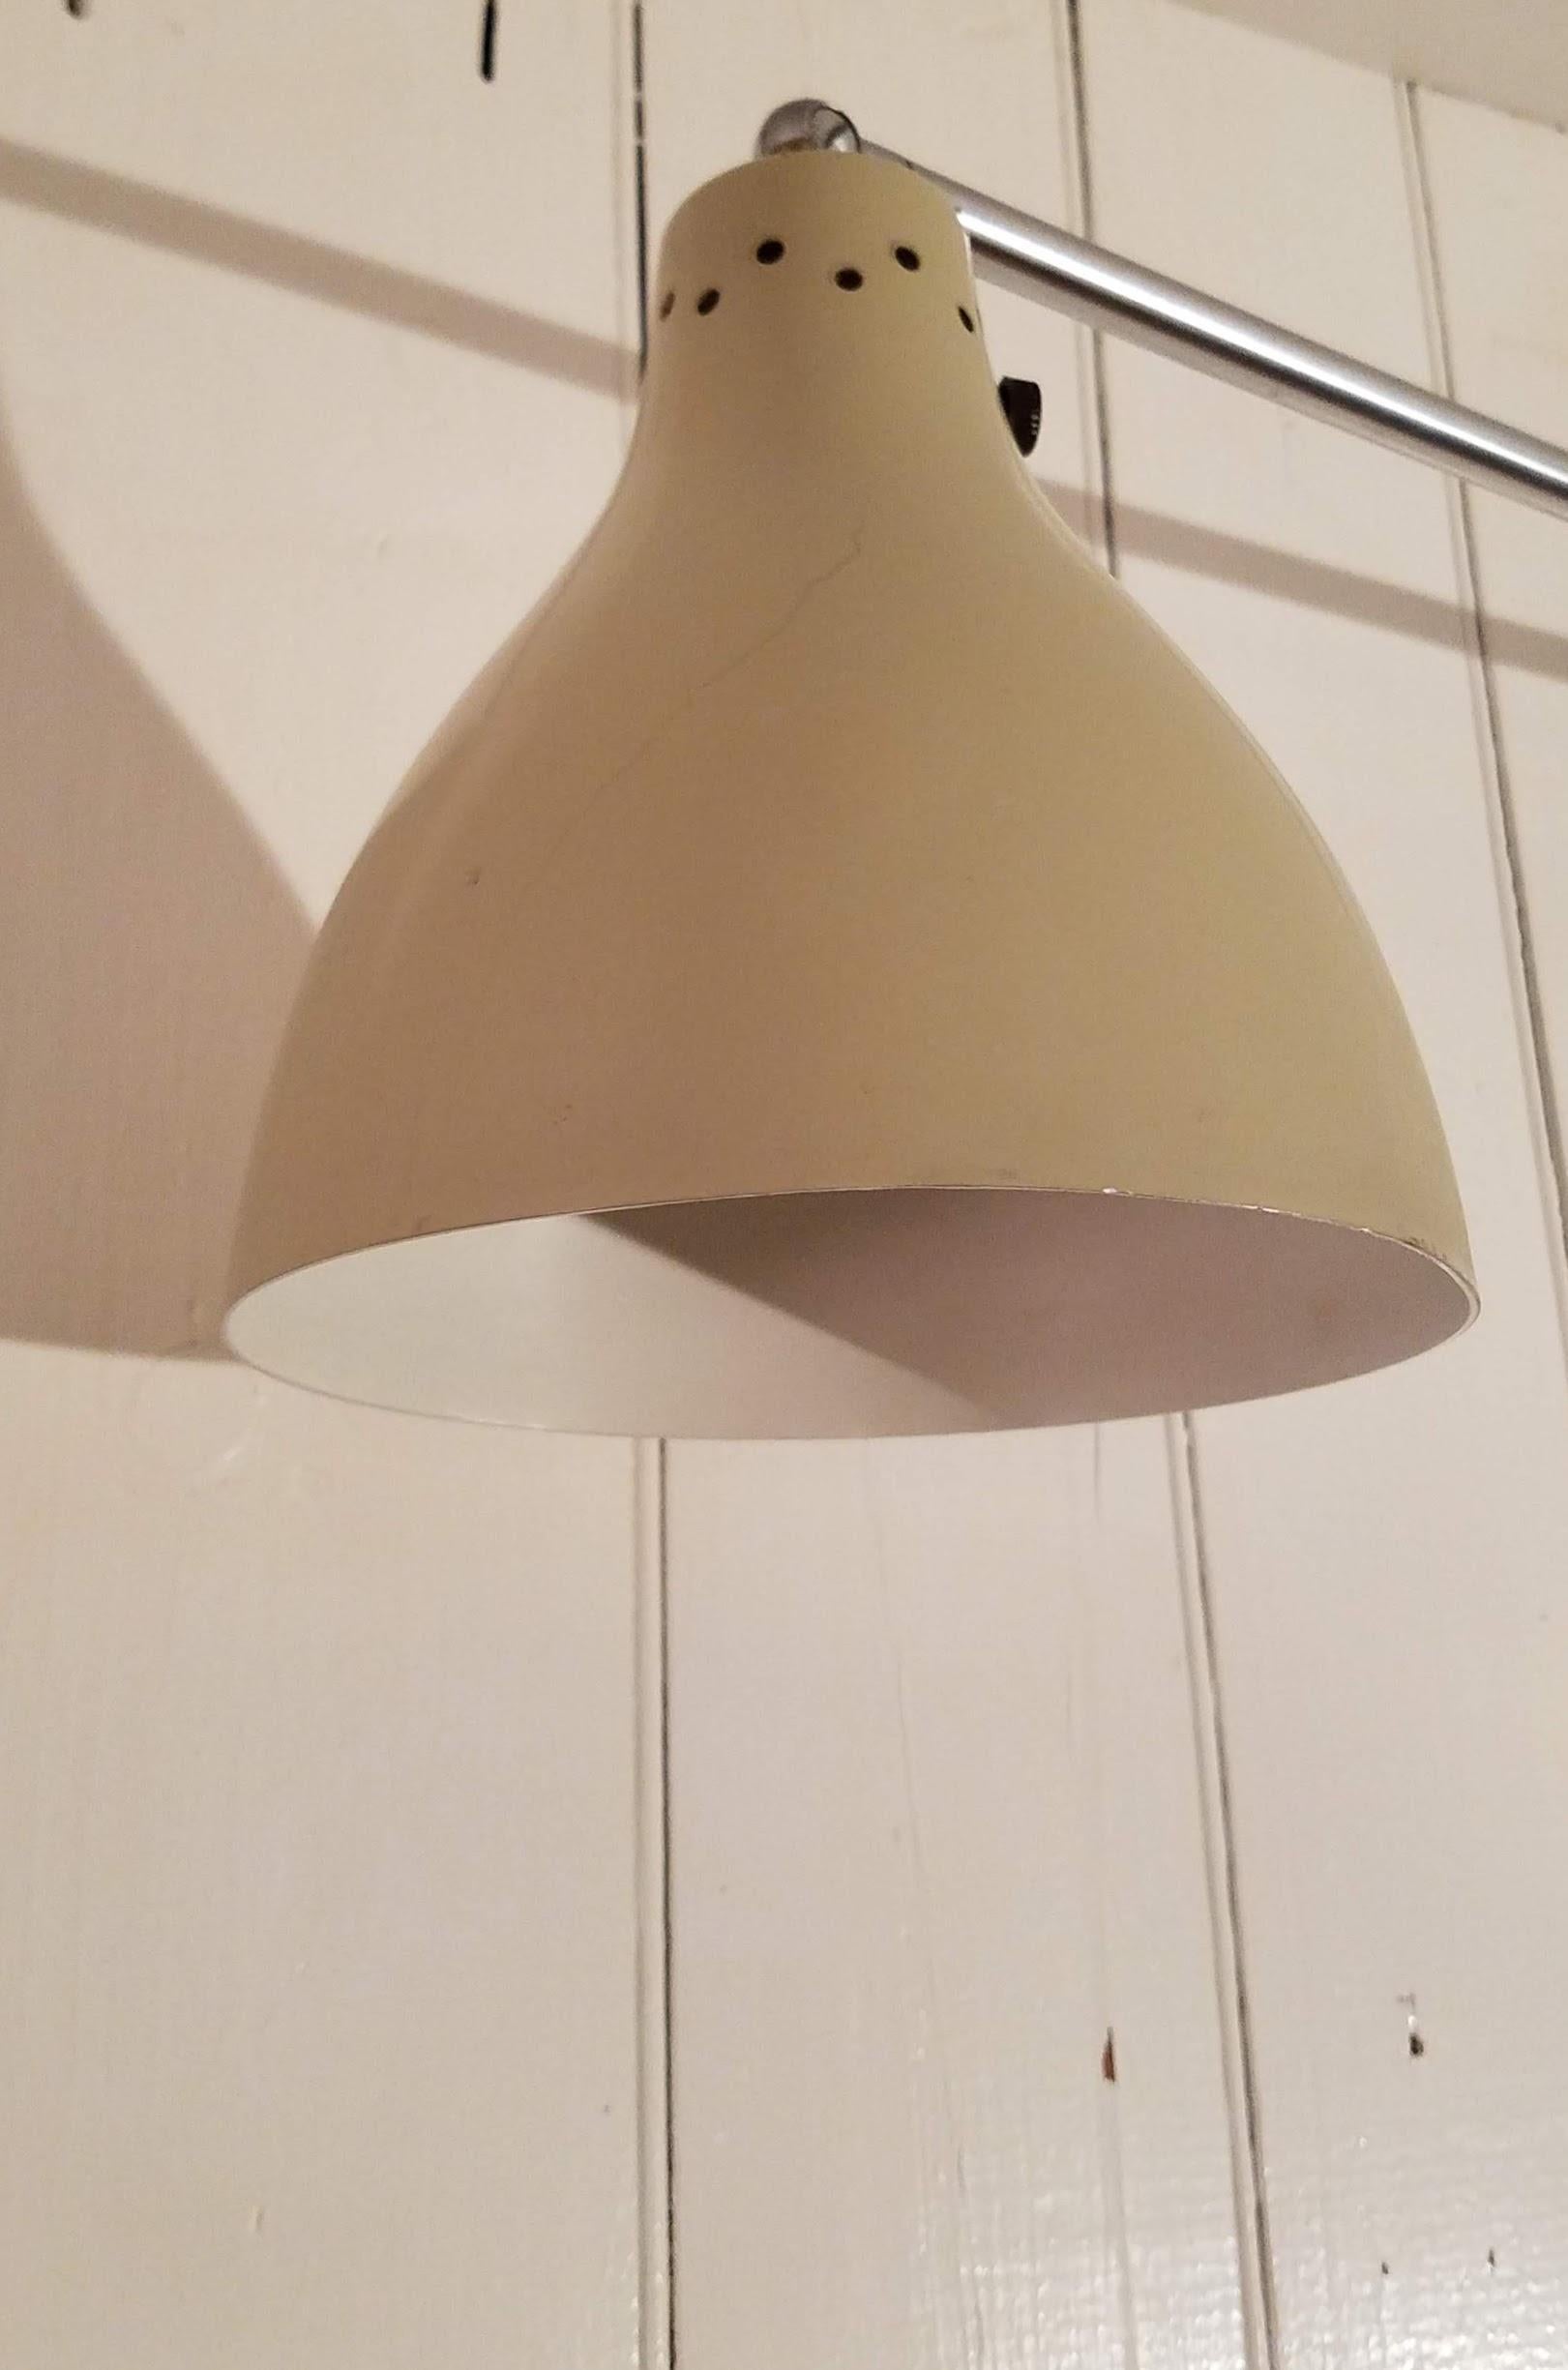 Greta Von Nessen Pair of Adjustable NS 945 Swing Arm Wall Lamps, circa 1950 In Good Condition For Sale In Camden, ME